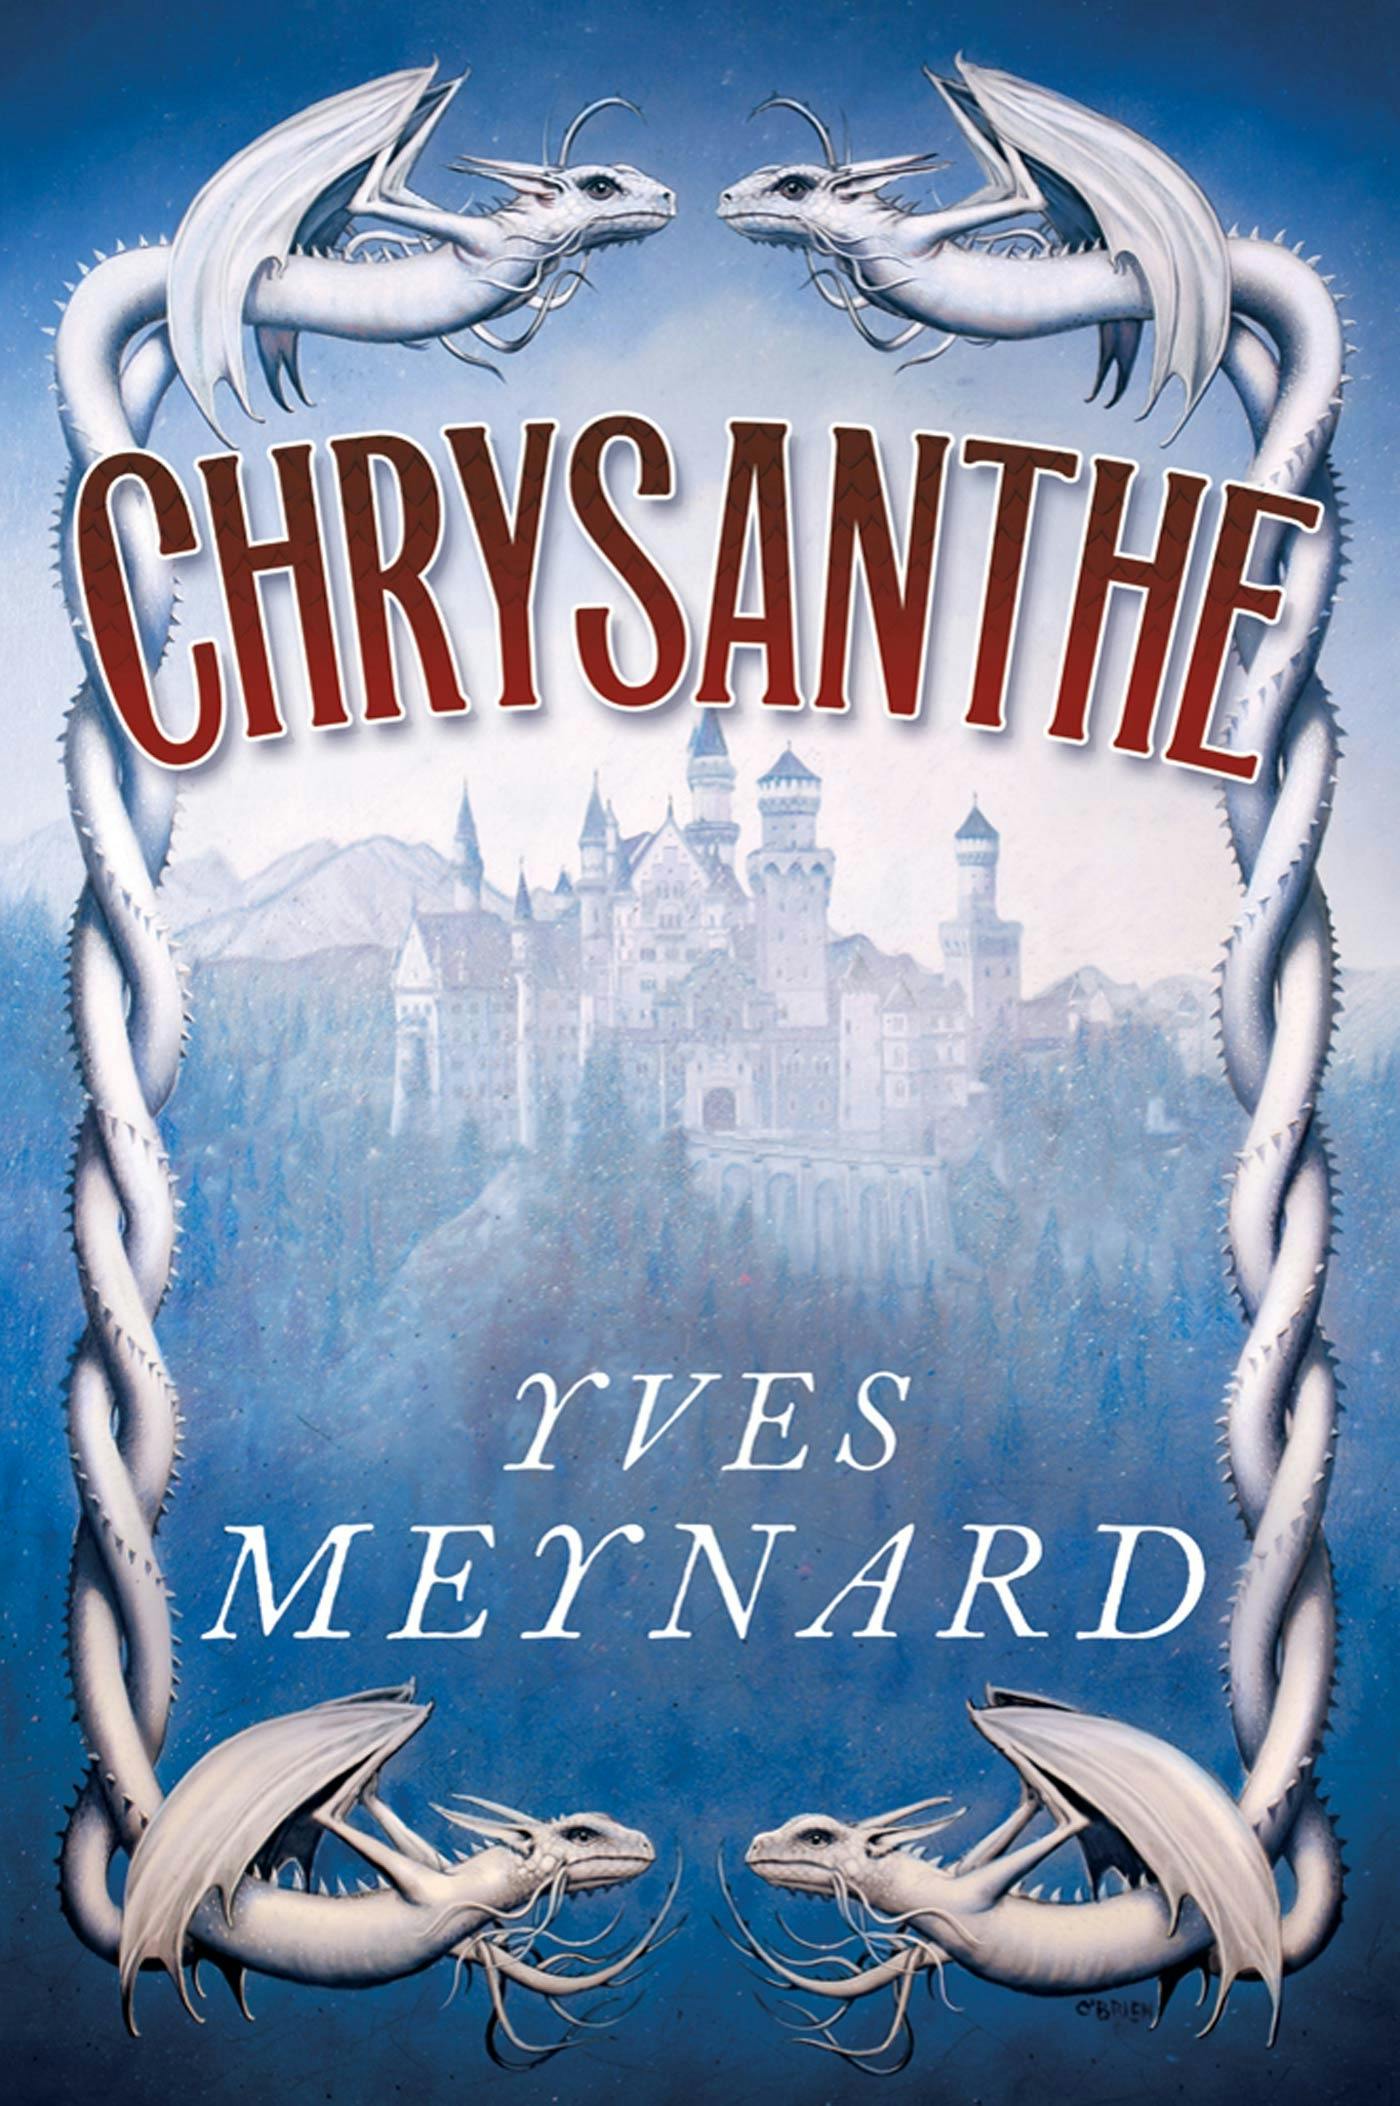 Cover for the book titled as: Chrysanthe